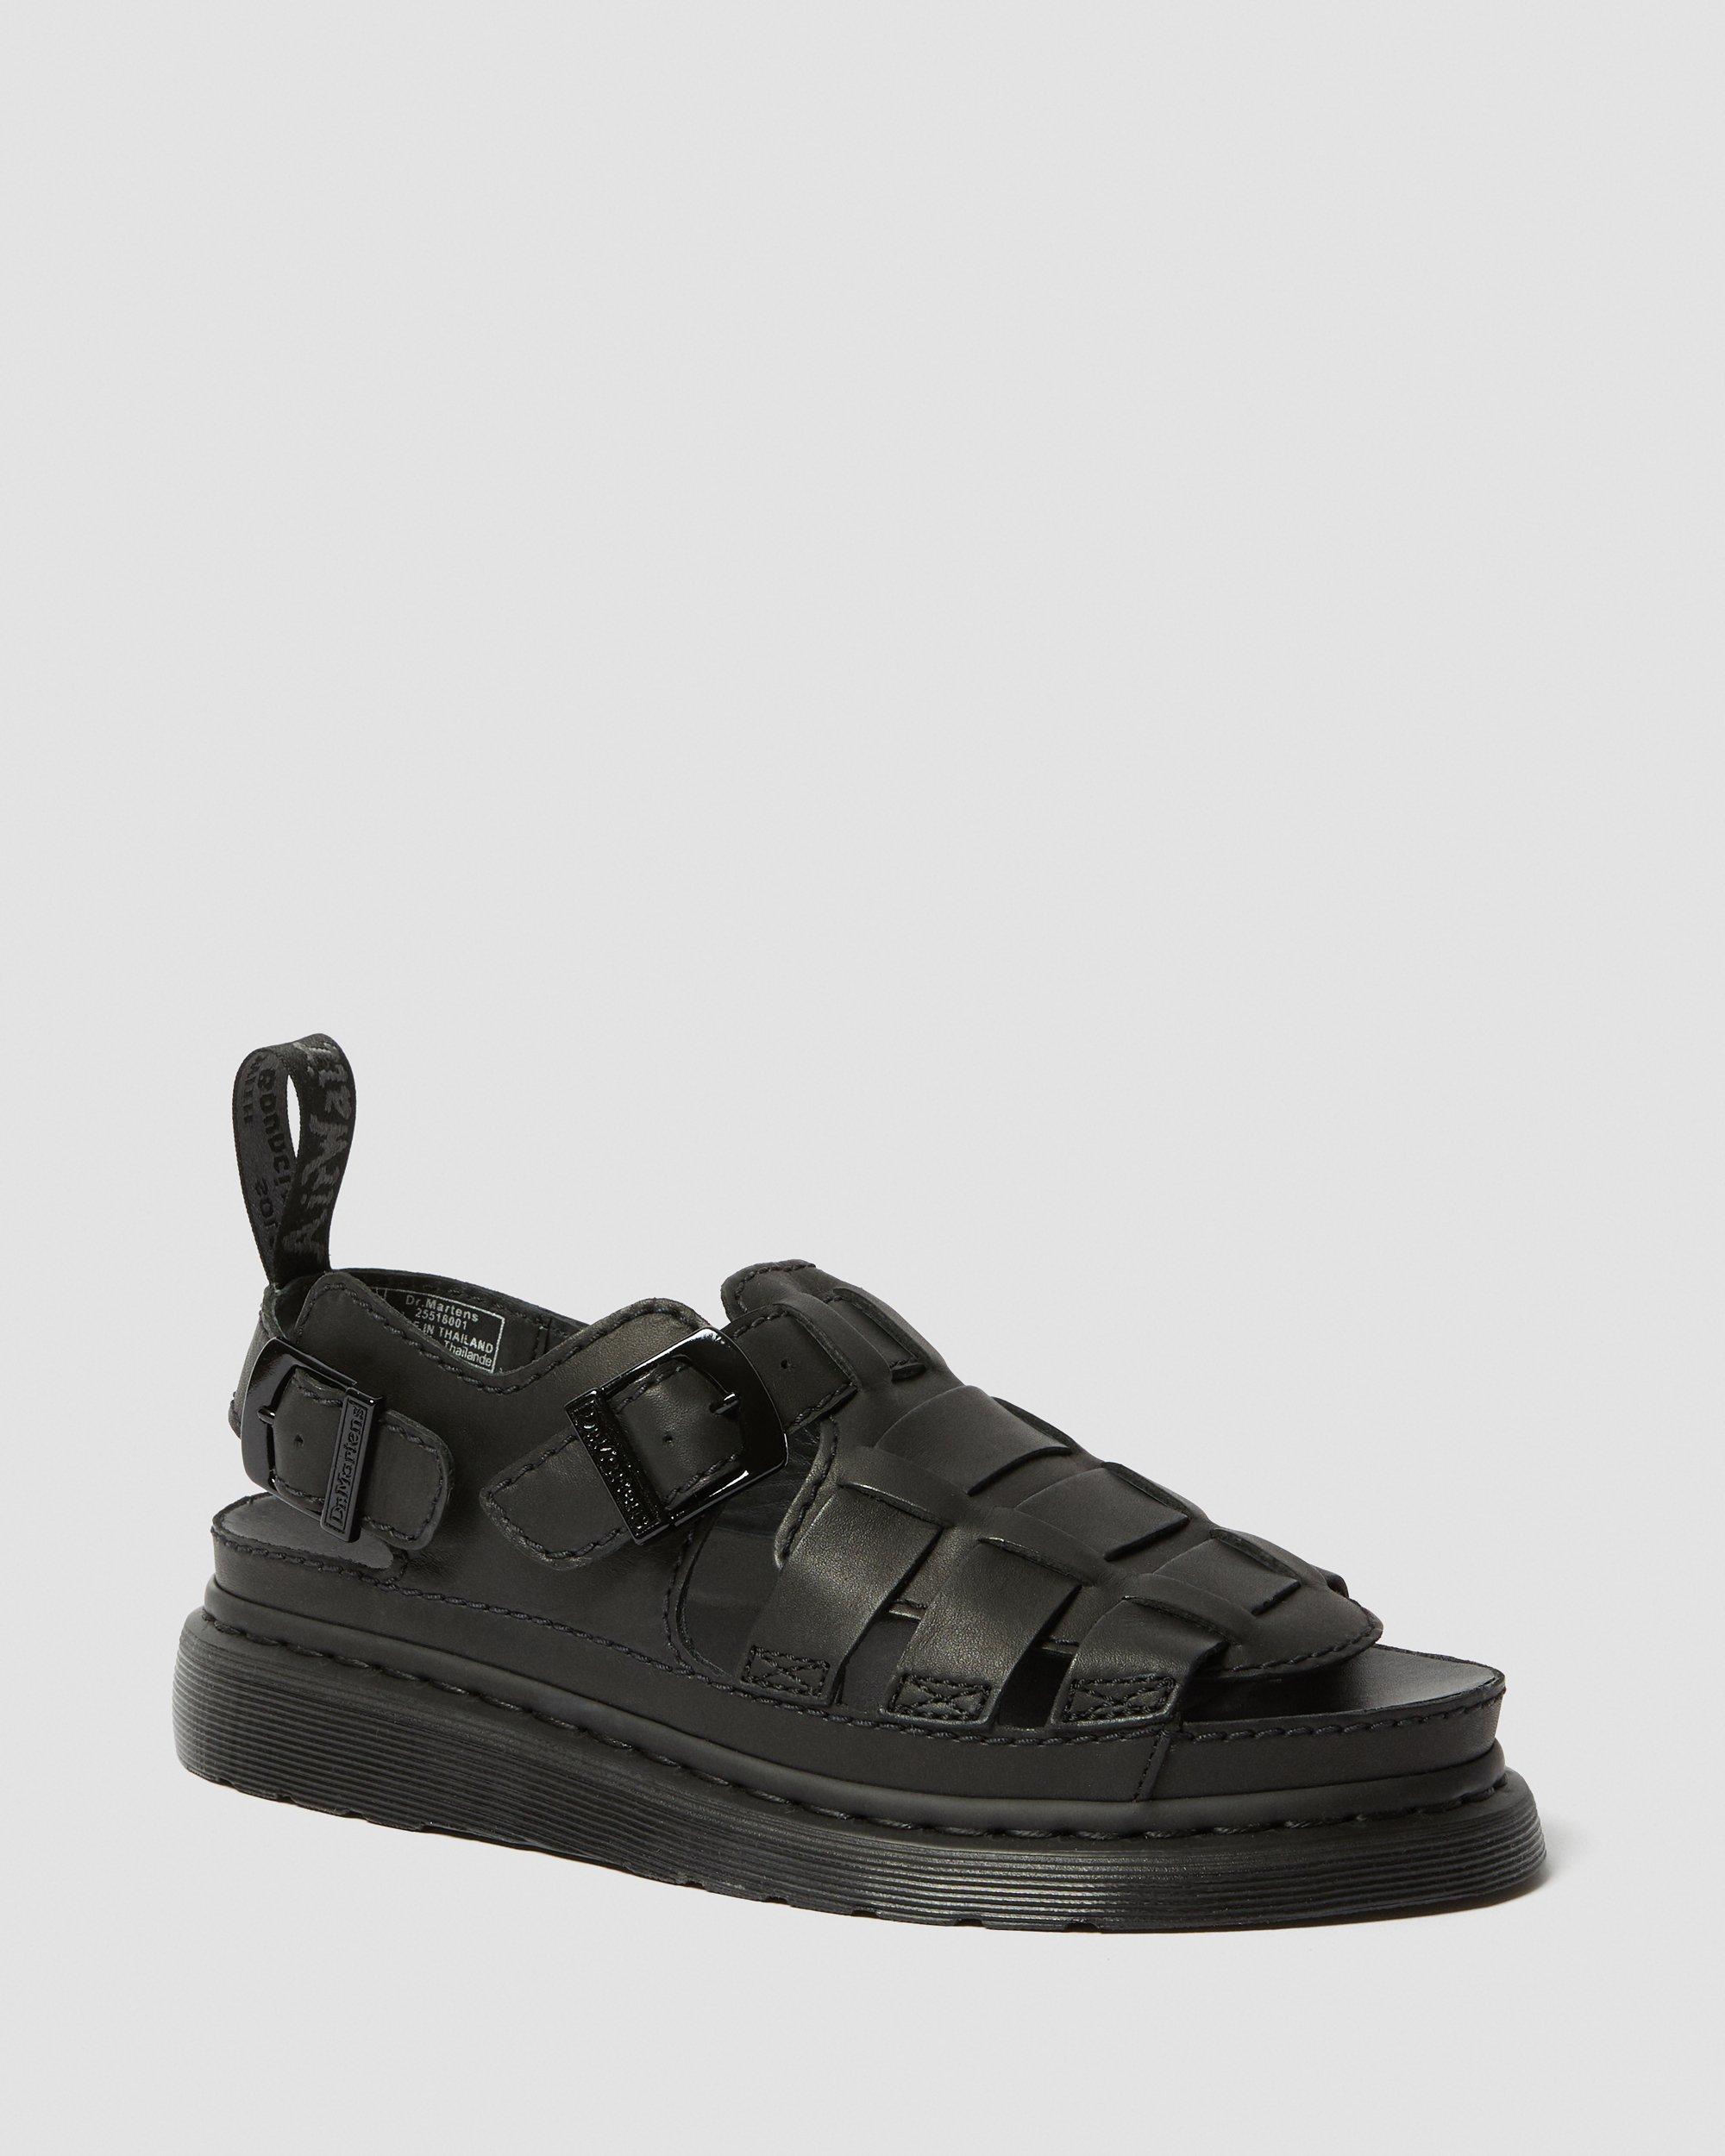 8092 MONO LEATHER FISHERMAN SANDALS in Black | Dr. Martens